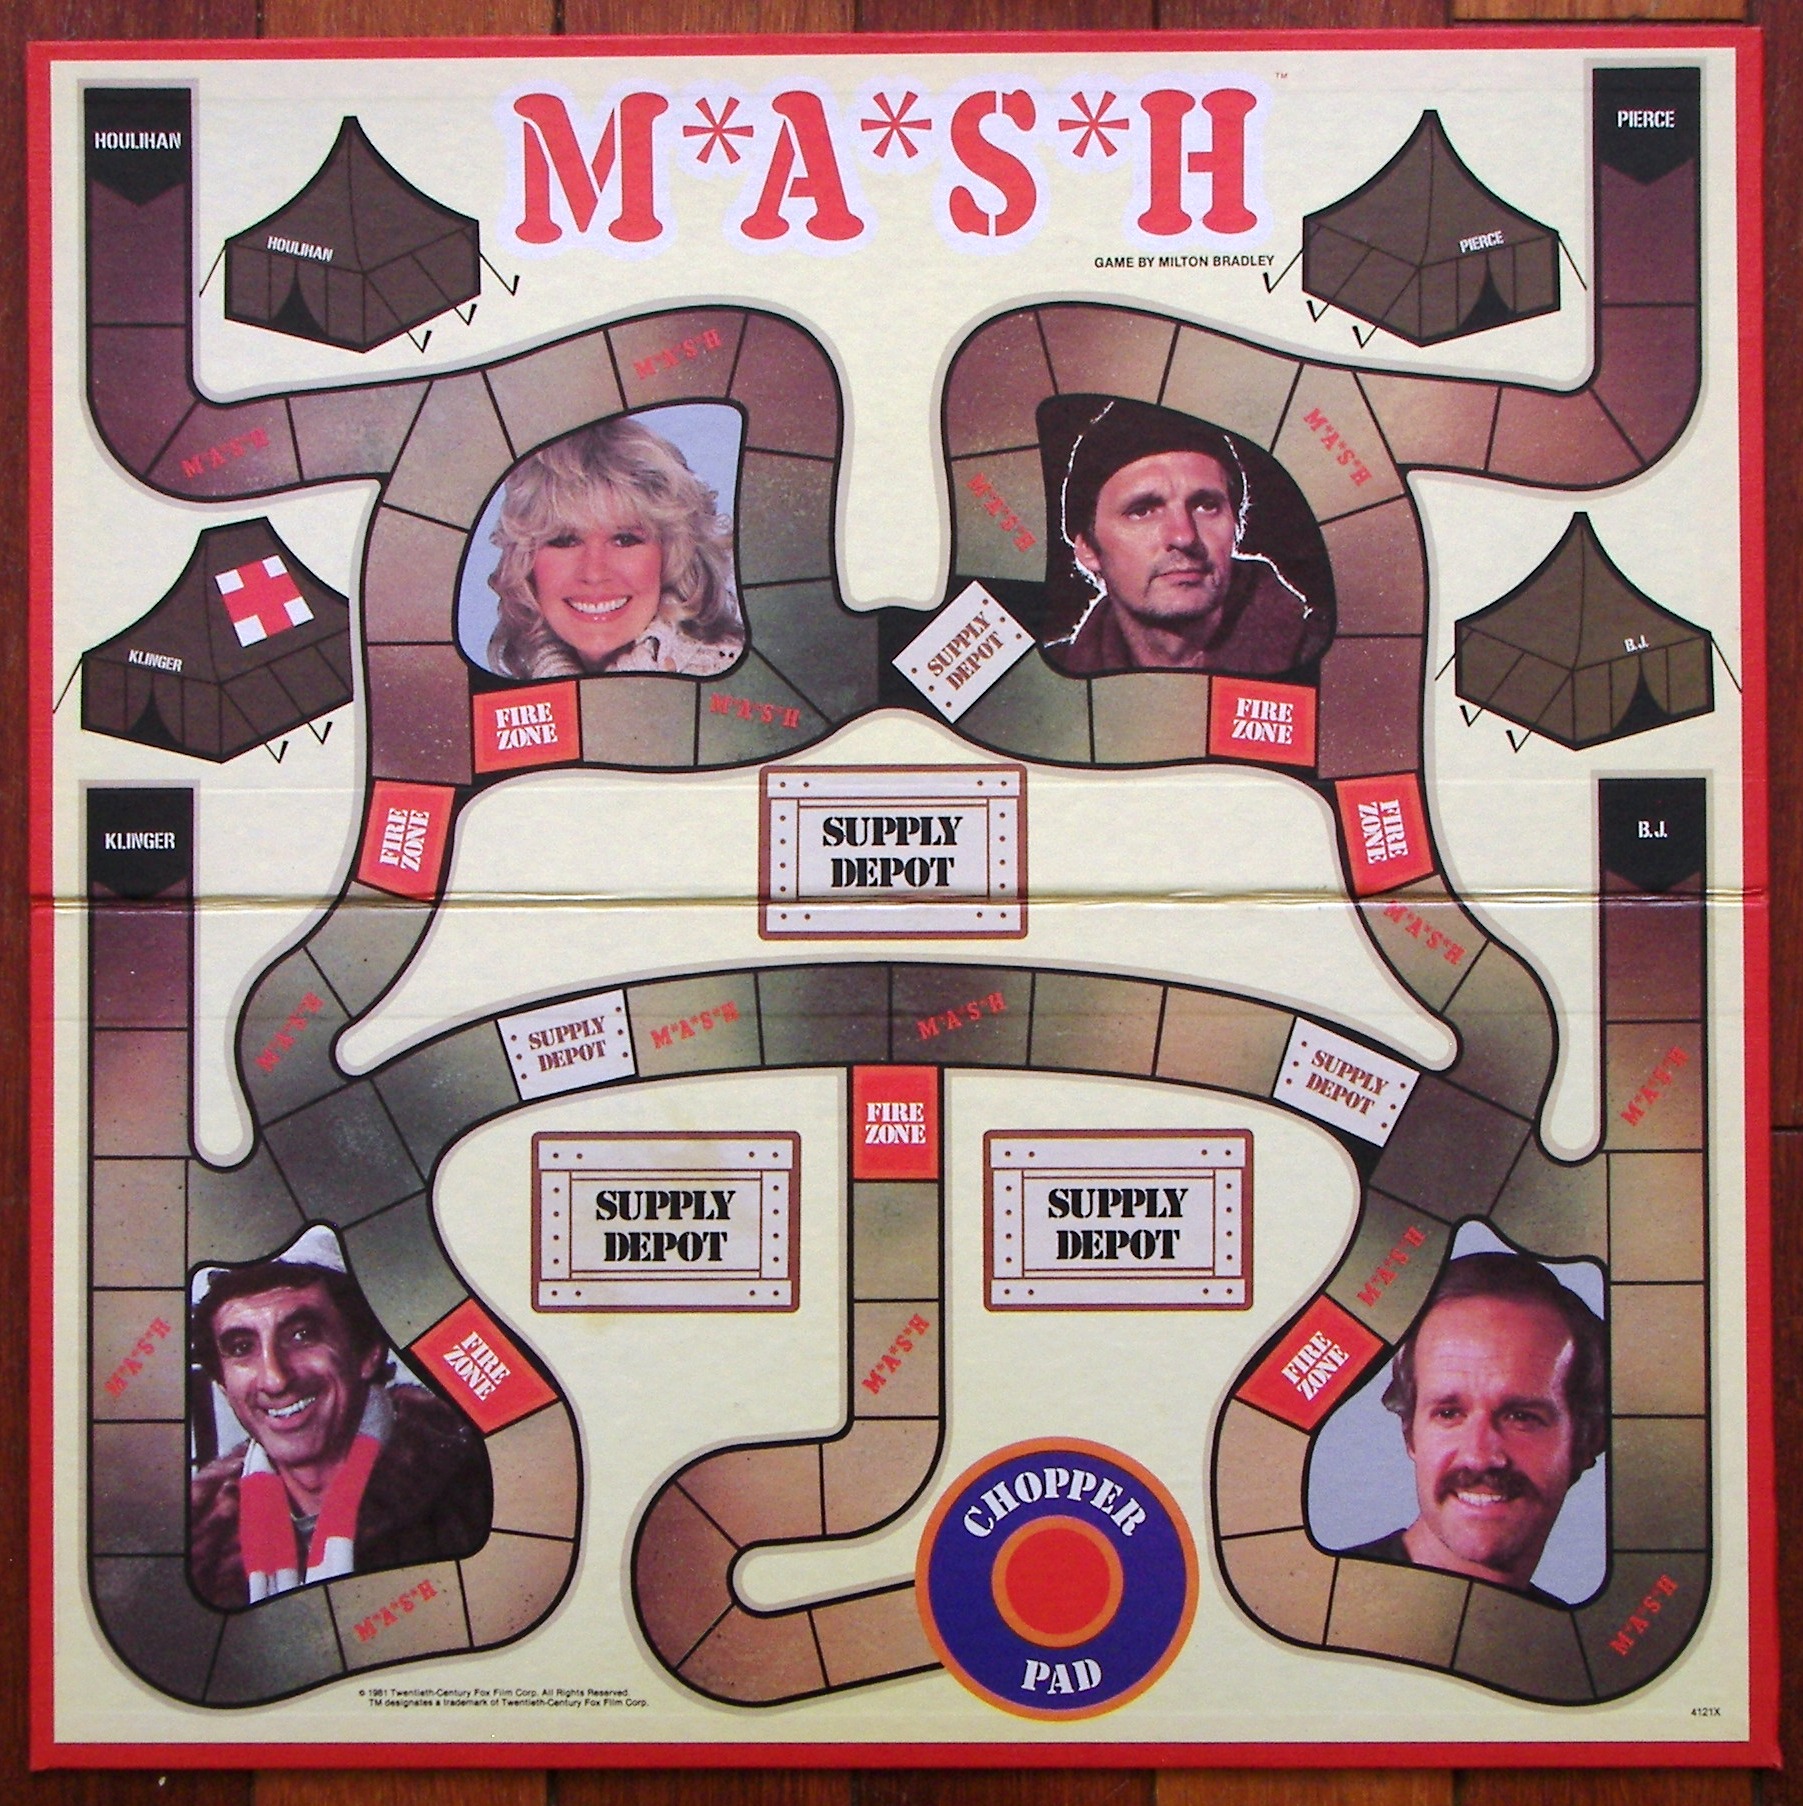 1981 M*A*S*H MASH Board Game by MB, Springfield, MA tomsk3000